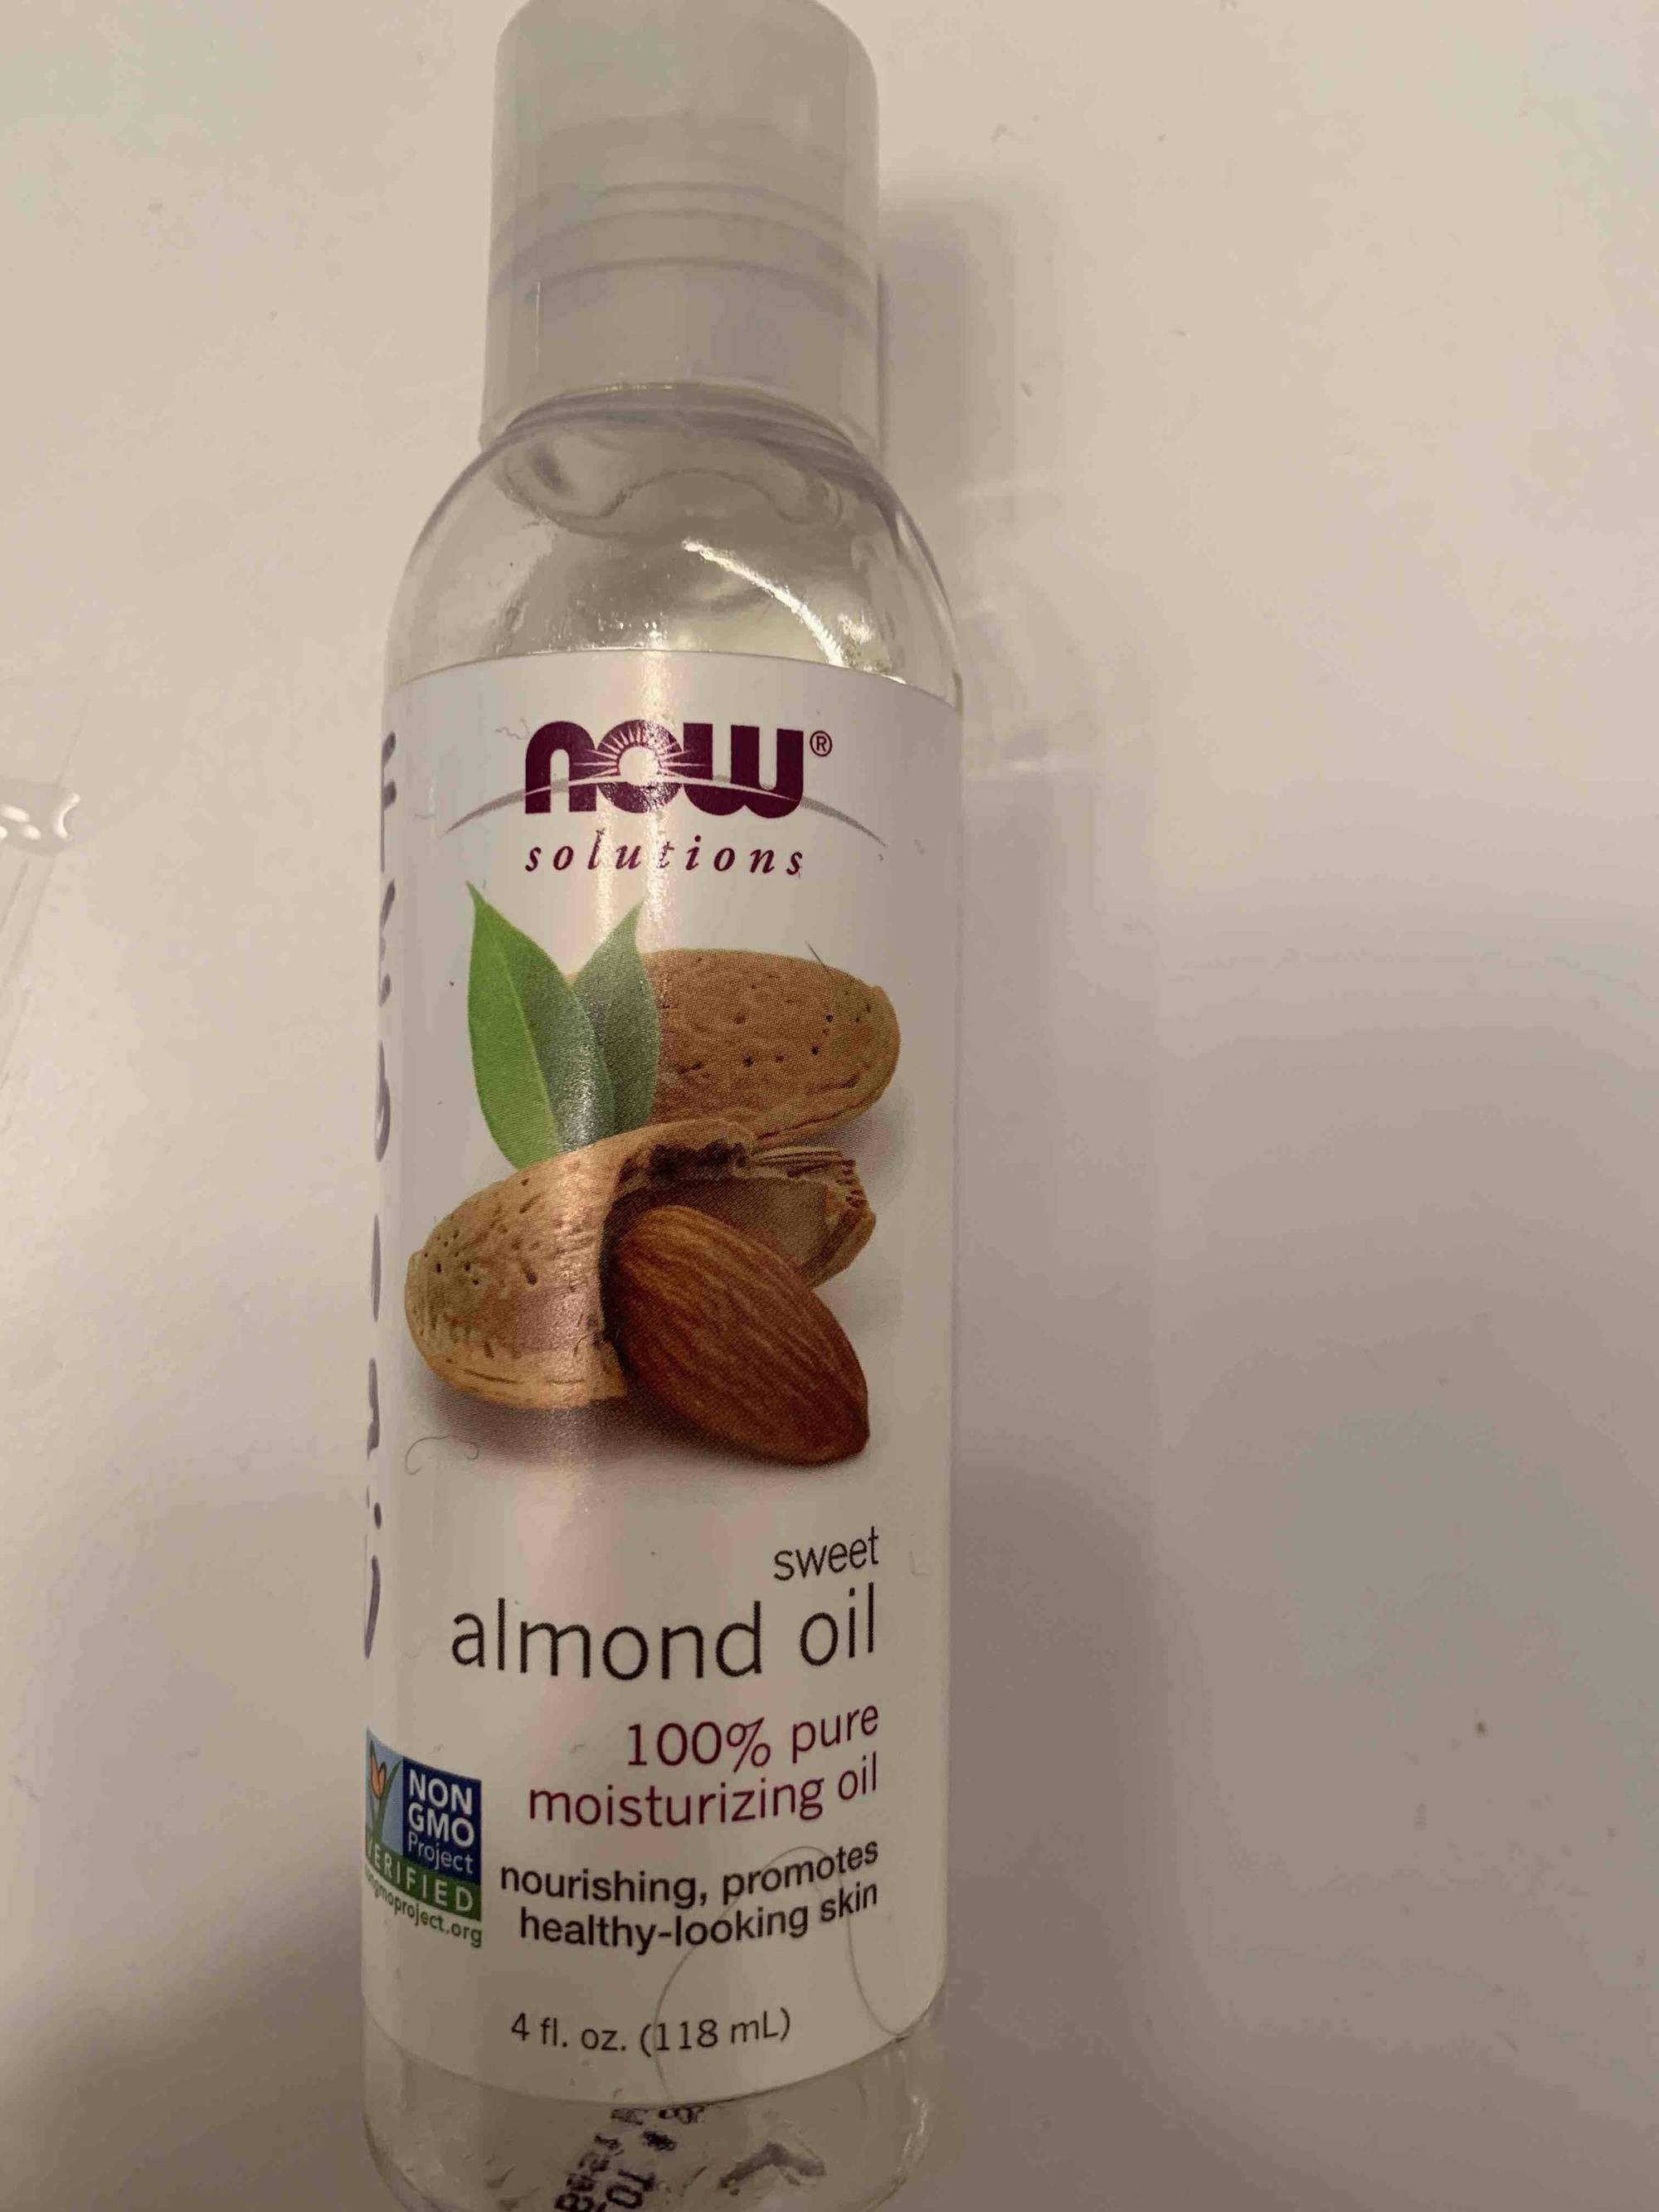 NOW SOLUTIONS - Sweet almond oil